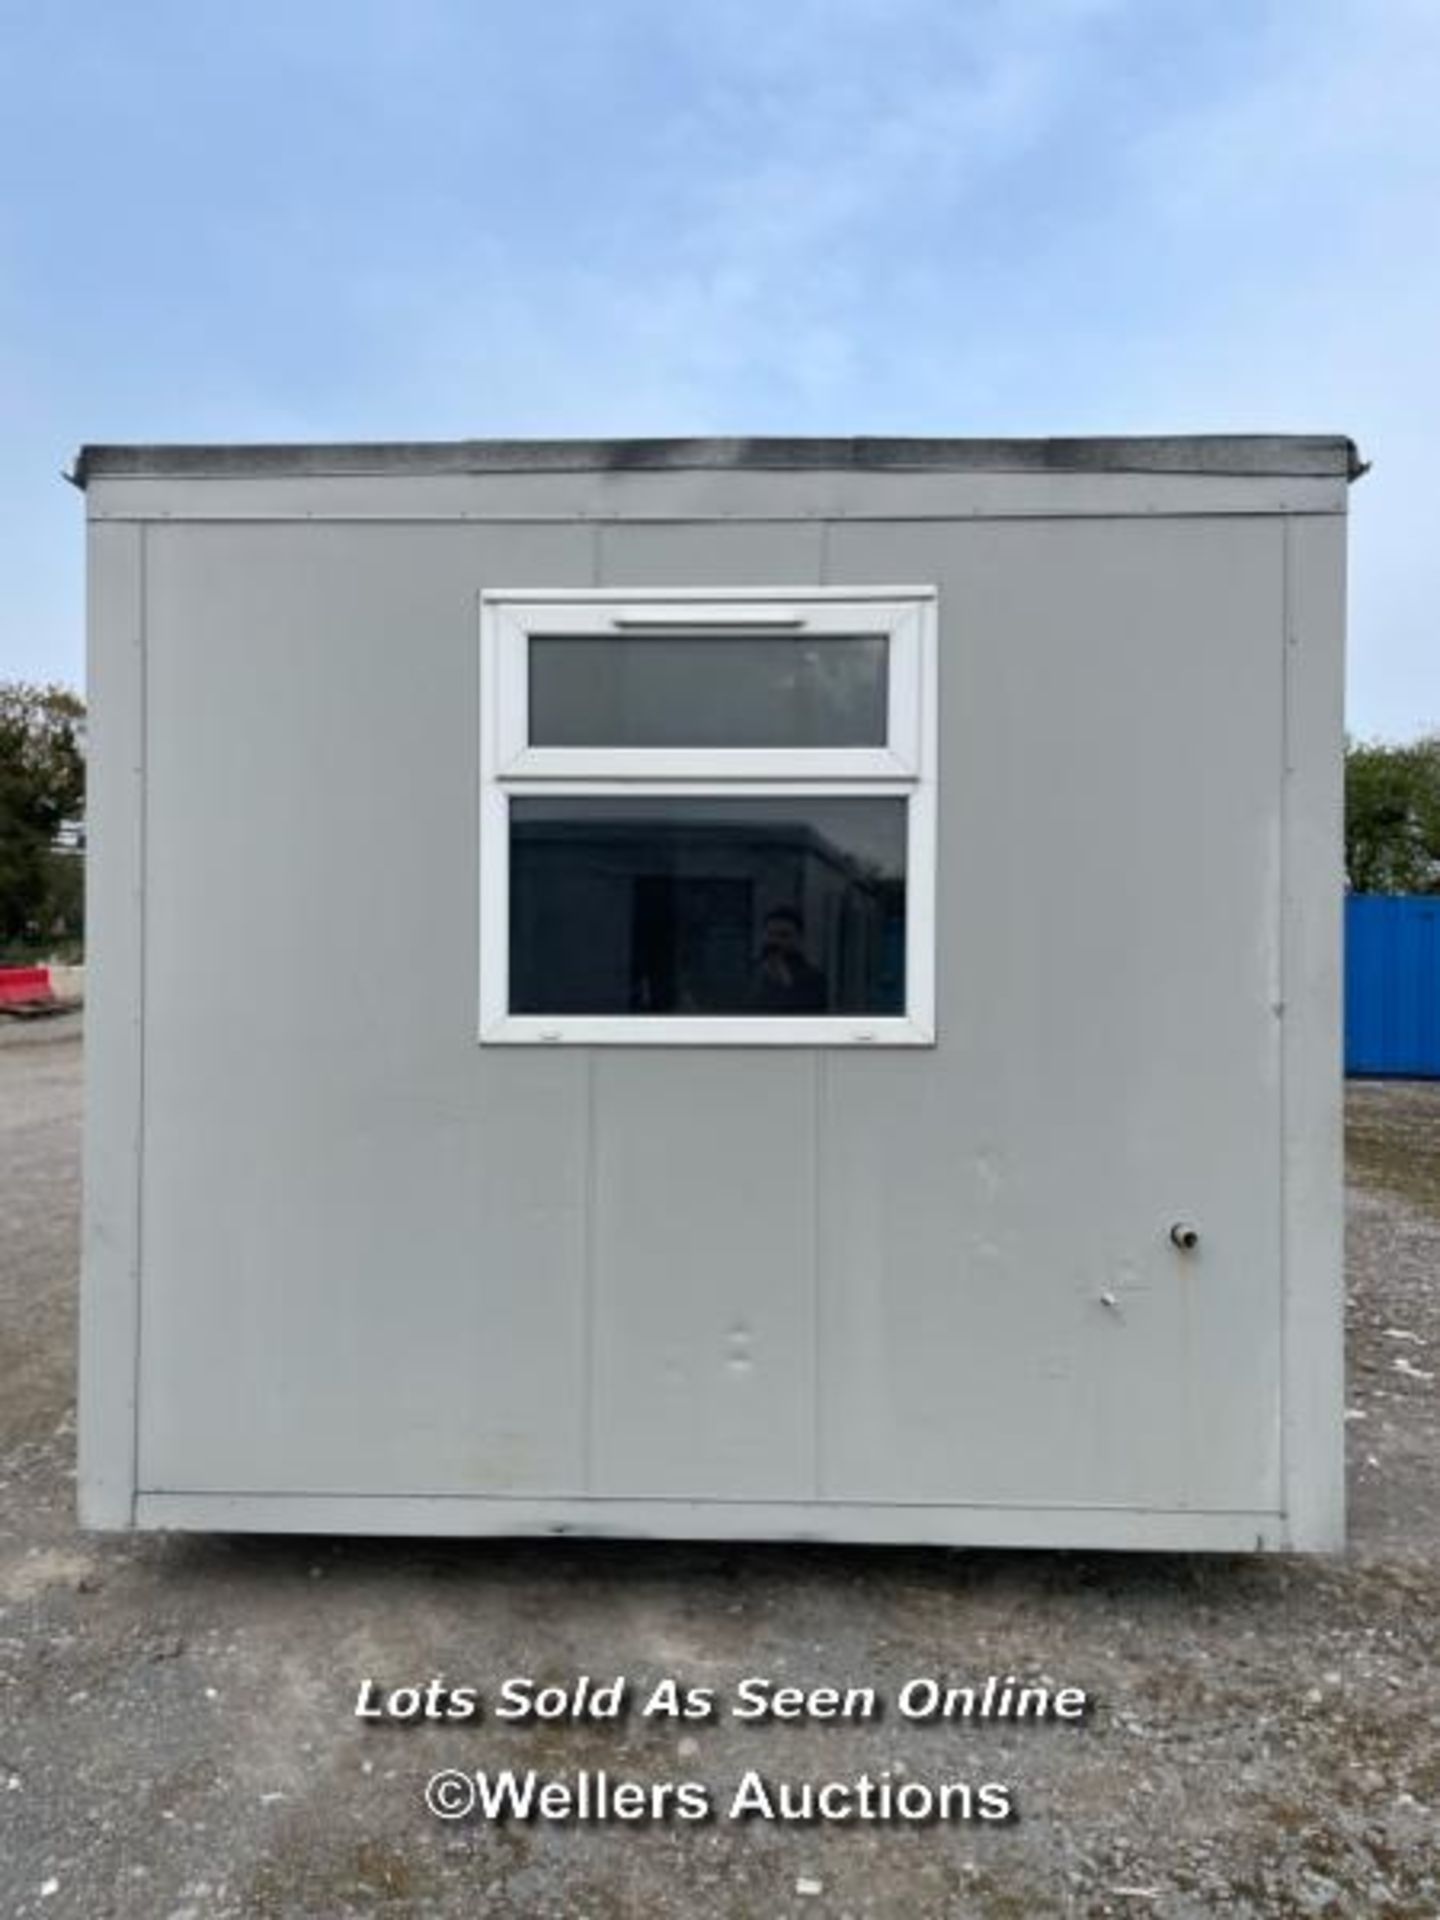 30' x 10' PORTABLE PLASTISOL OFFICE BUILDING, TWO ROOMS, UNIT INCLUDES KITCHENETTE WITH WASH - Image 3 of 21